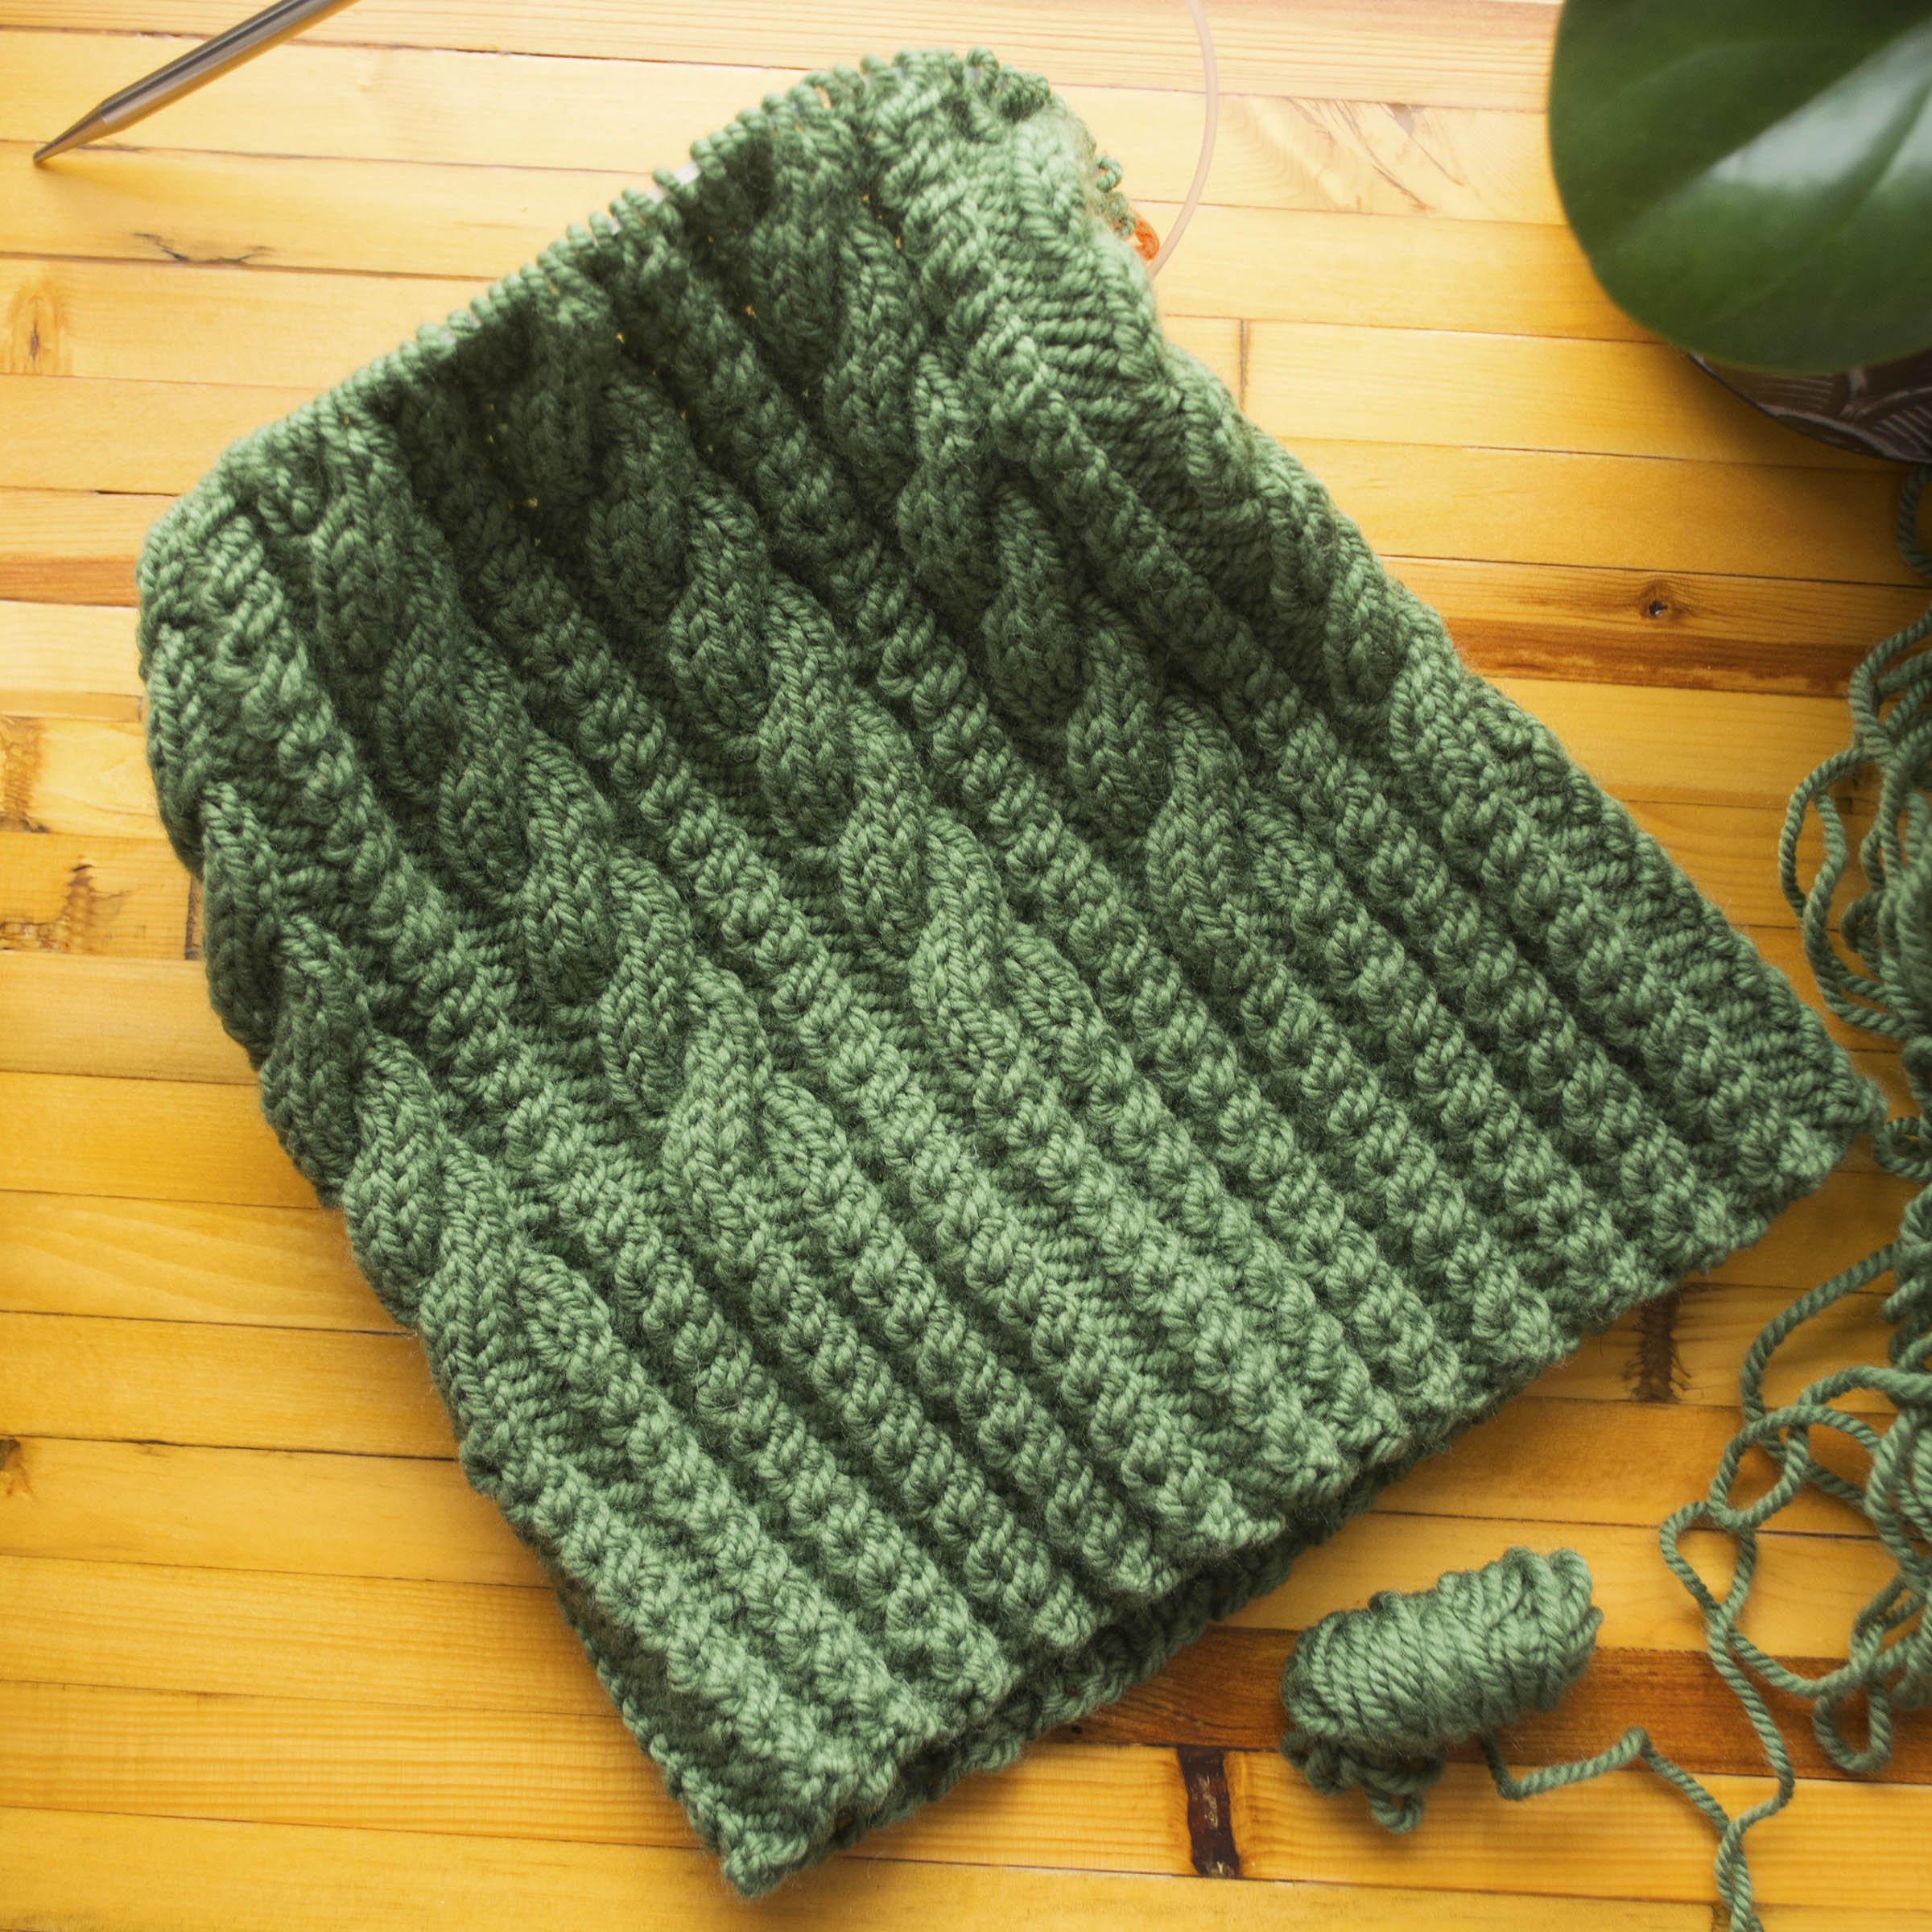  Partially finished cable knit dark green beanie with one-by-one ribbing on the brim and alternating one-by-one and three-by-three ribbing on the crown, still on the needles, with a bobbin of yarn beside it, sitting next to a plant on a gold-stained 